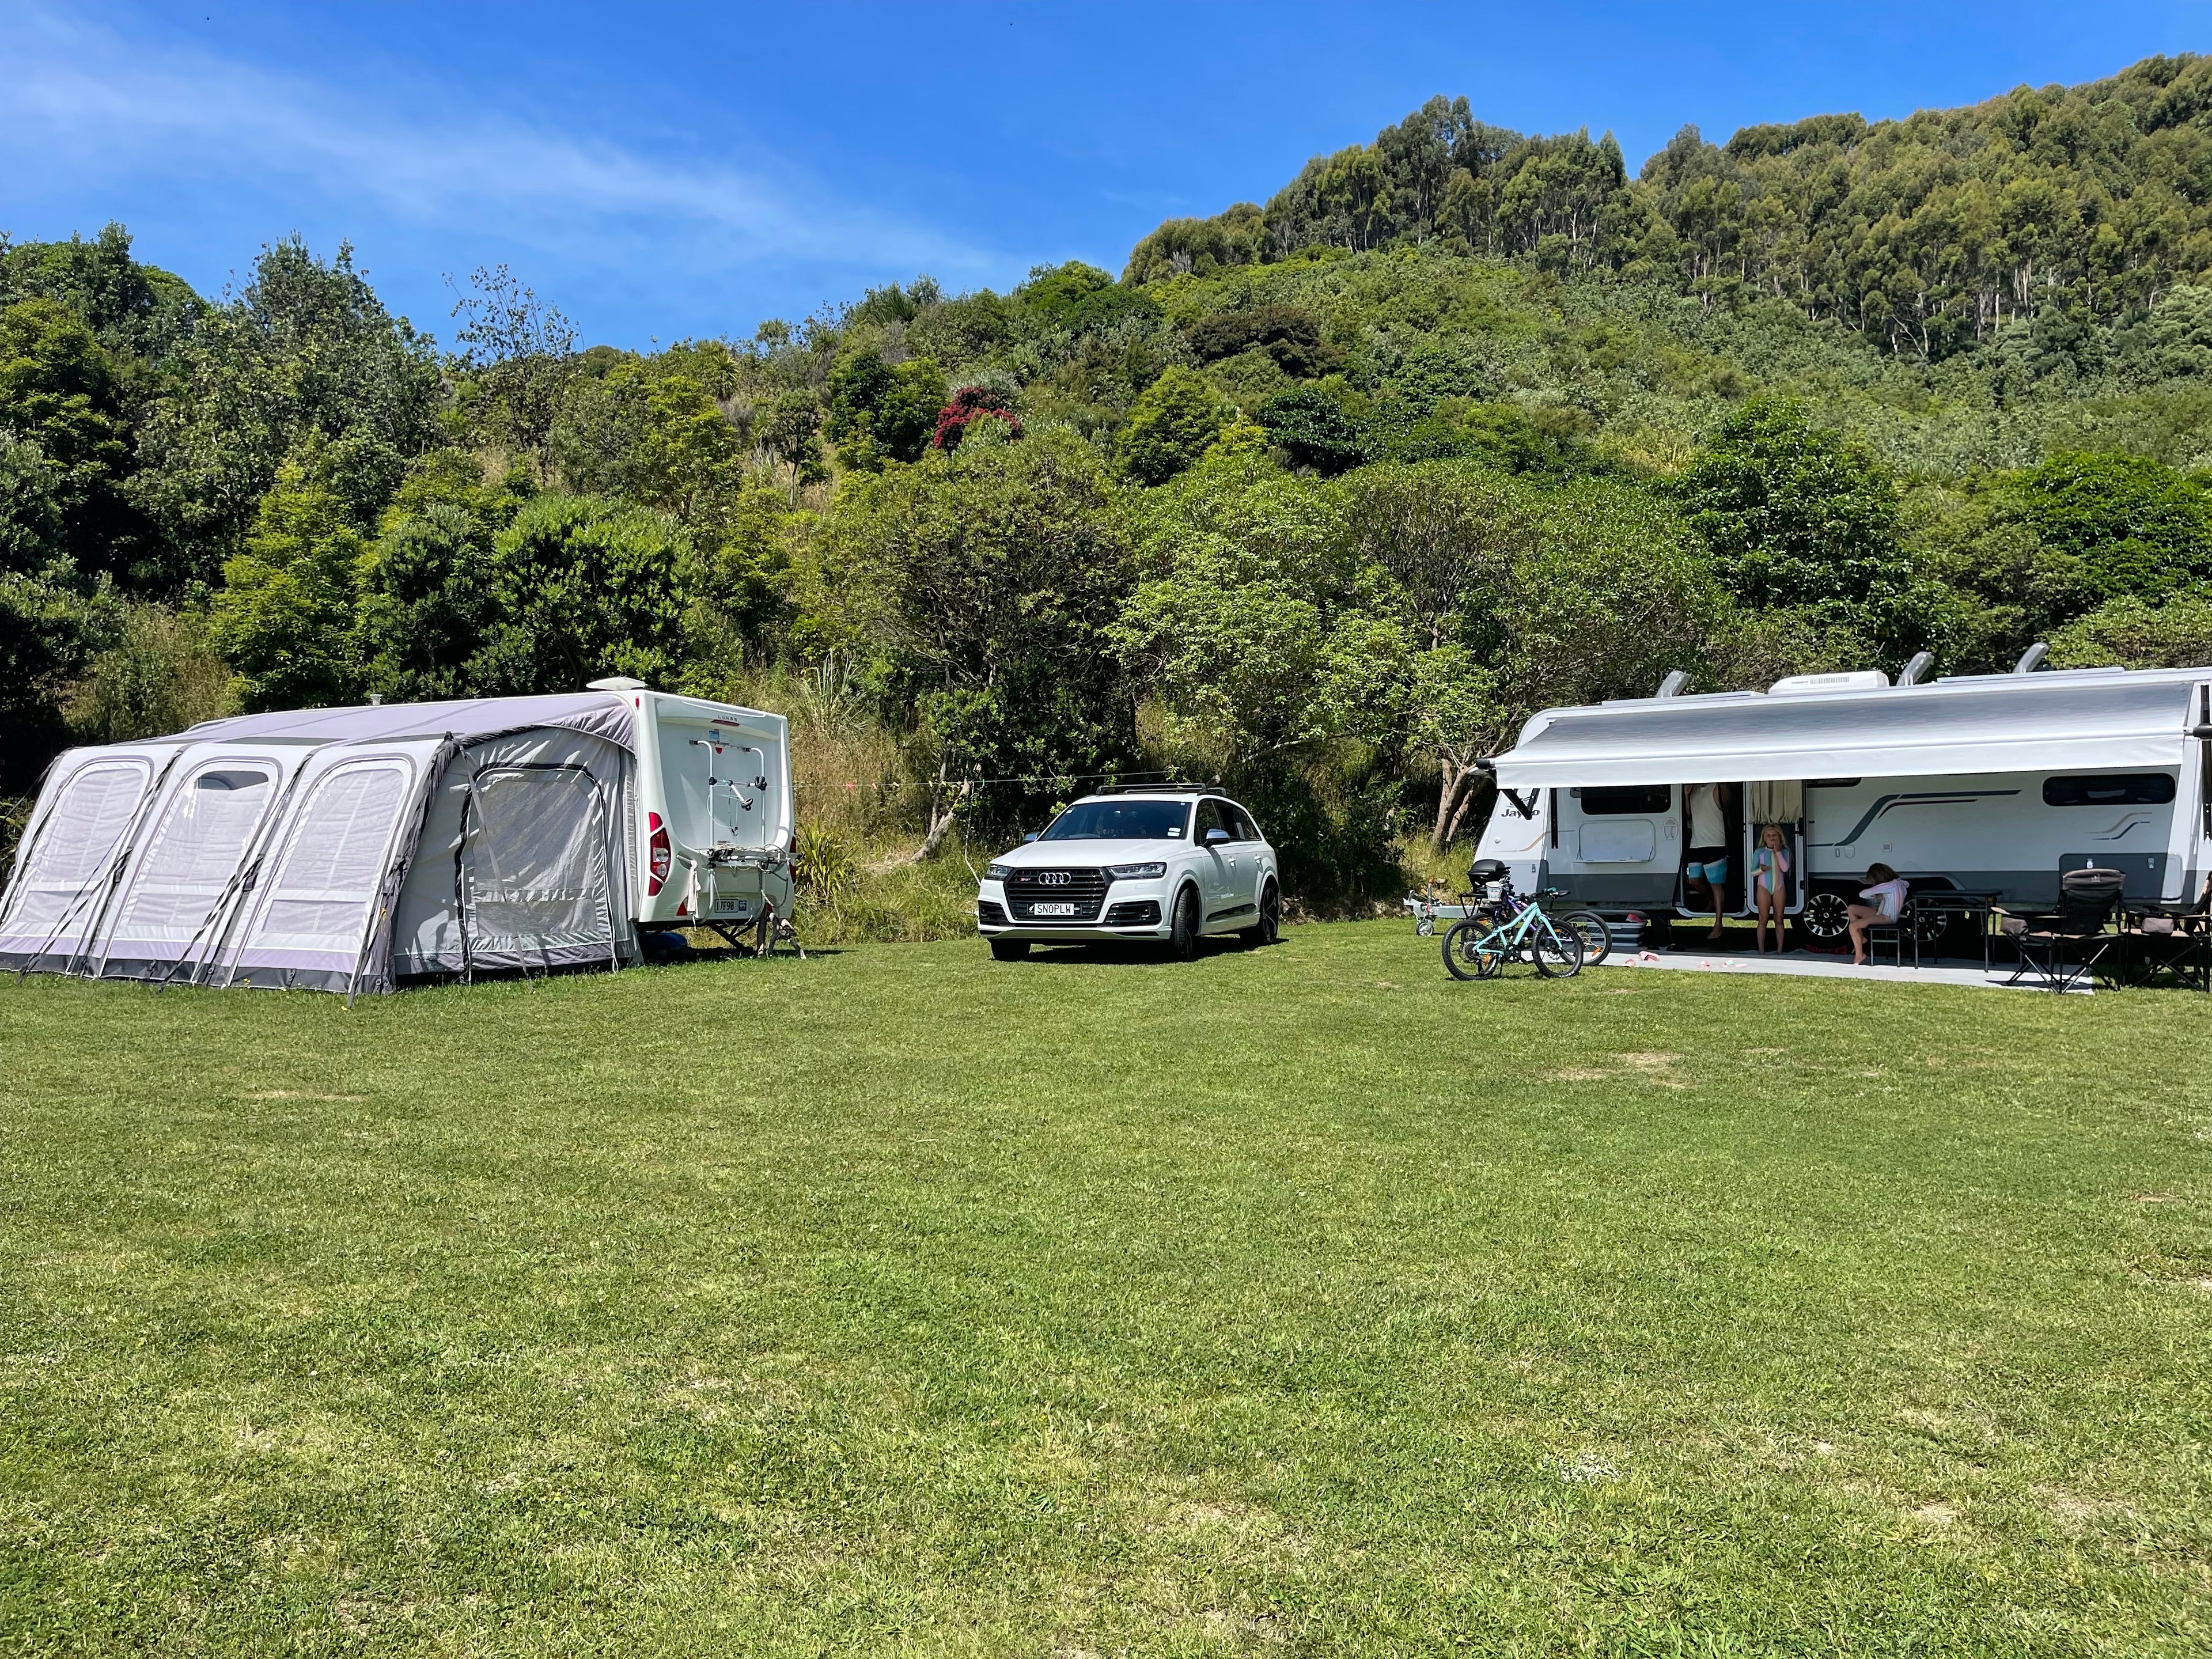 New versus Old Caravan the pros and cons